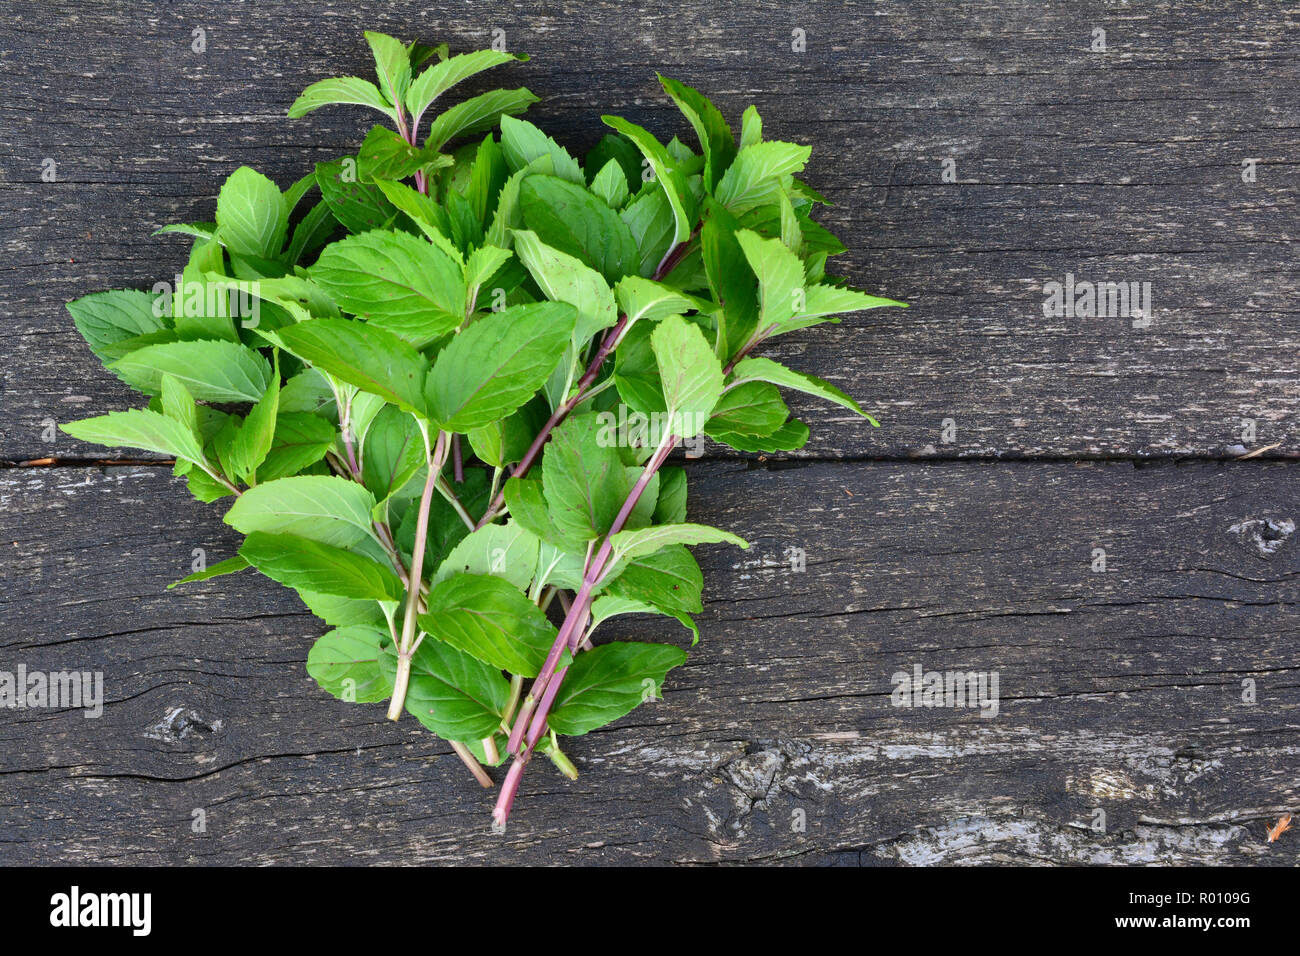 Bundle of freshly harvested wild Mentha aquatica or Water mint on wooden surface of old oak table with copy space Stock Photo